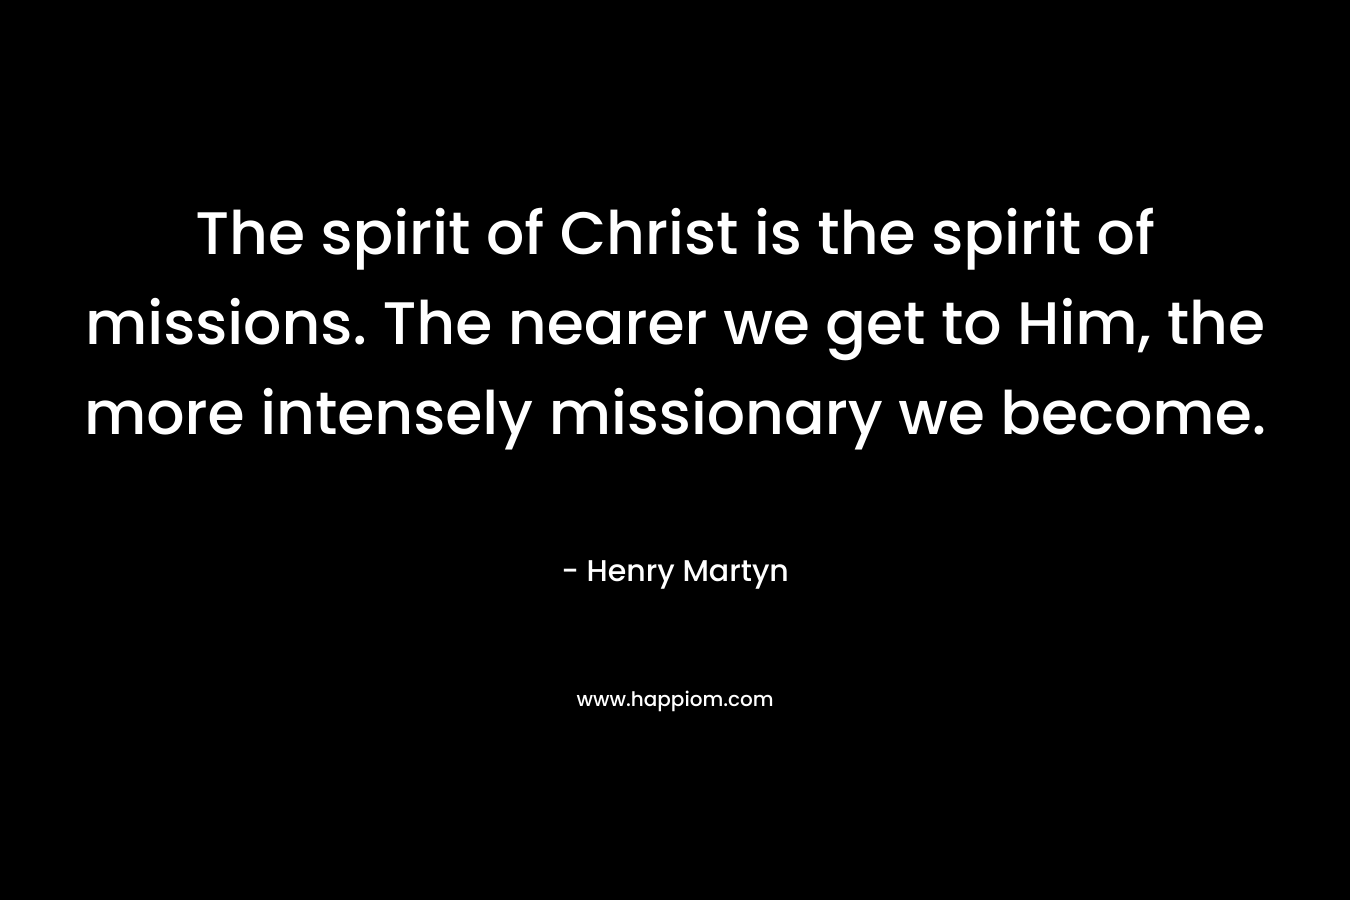 The spirit of Christ is the spirit of missions. The nearer we get to Him, the more intensely missionary we become.